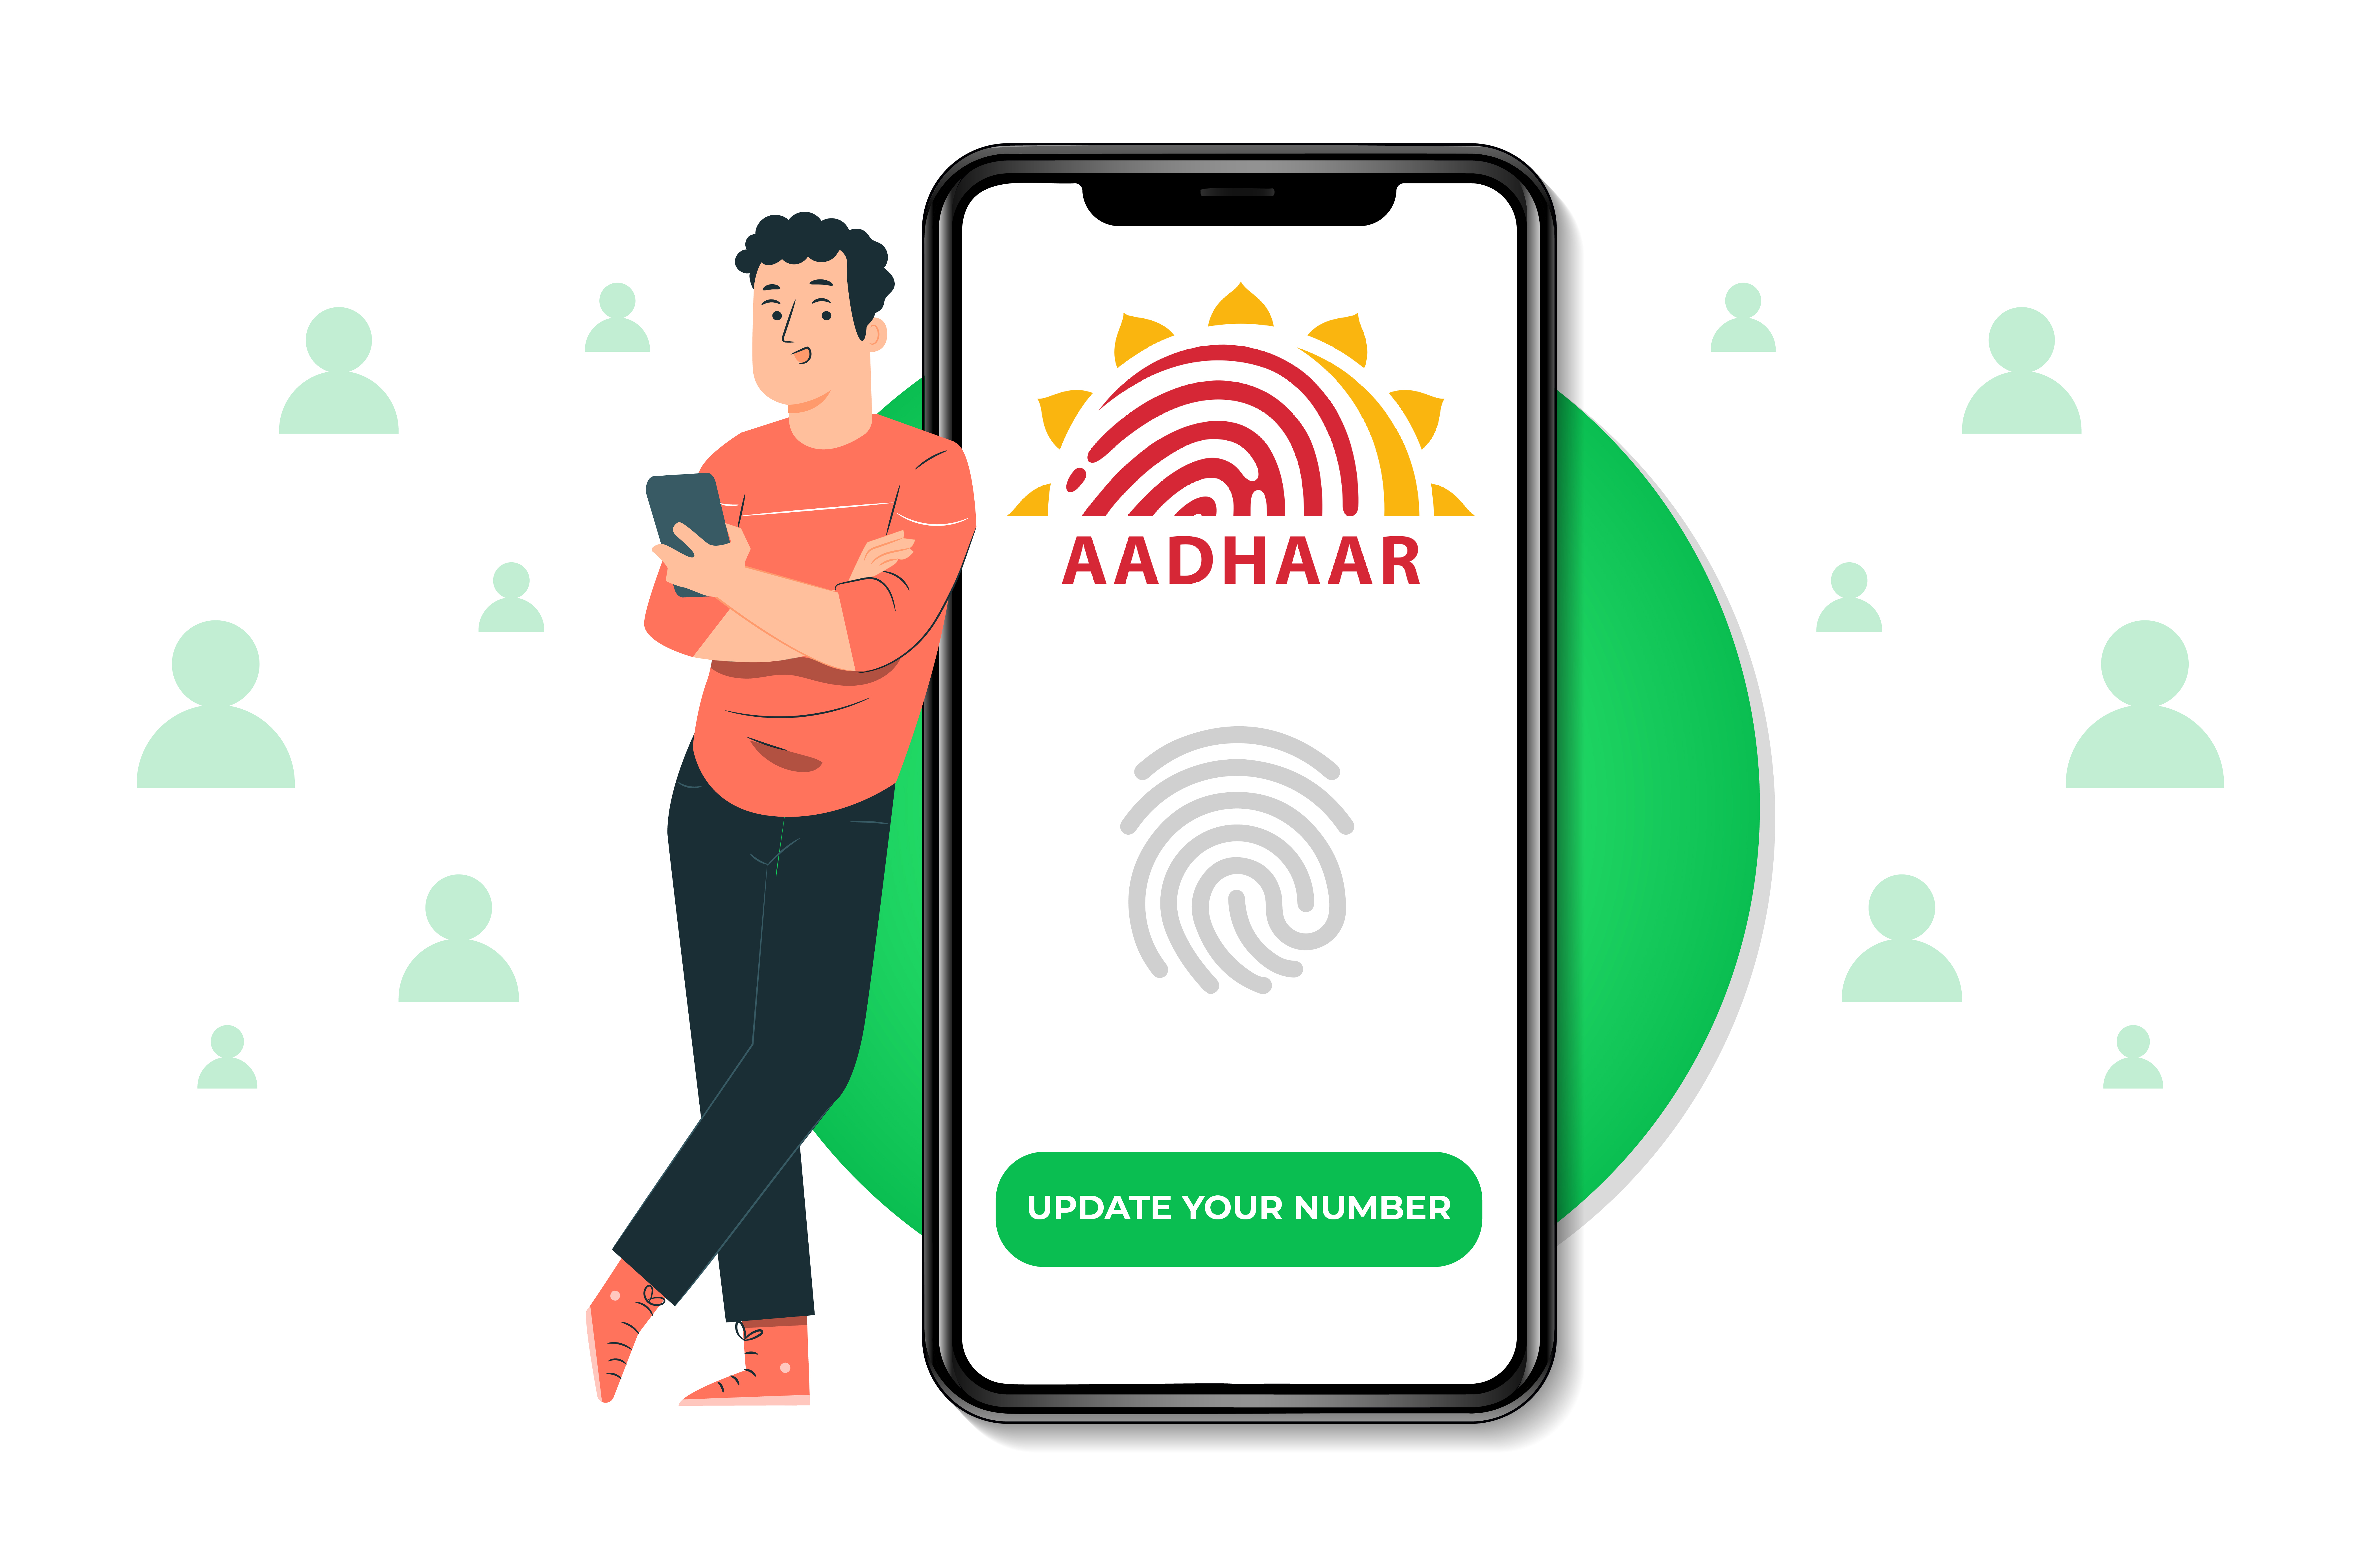 My mobile number is not linked to my Aadhar card